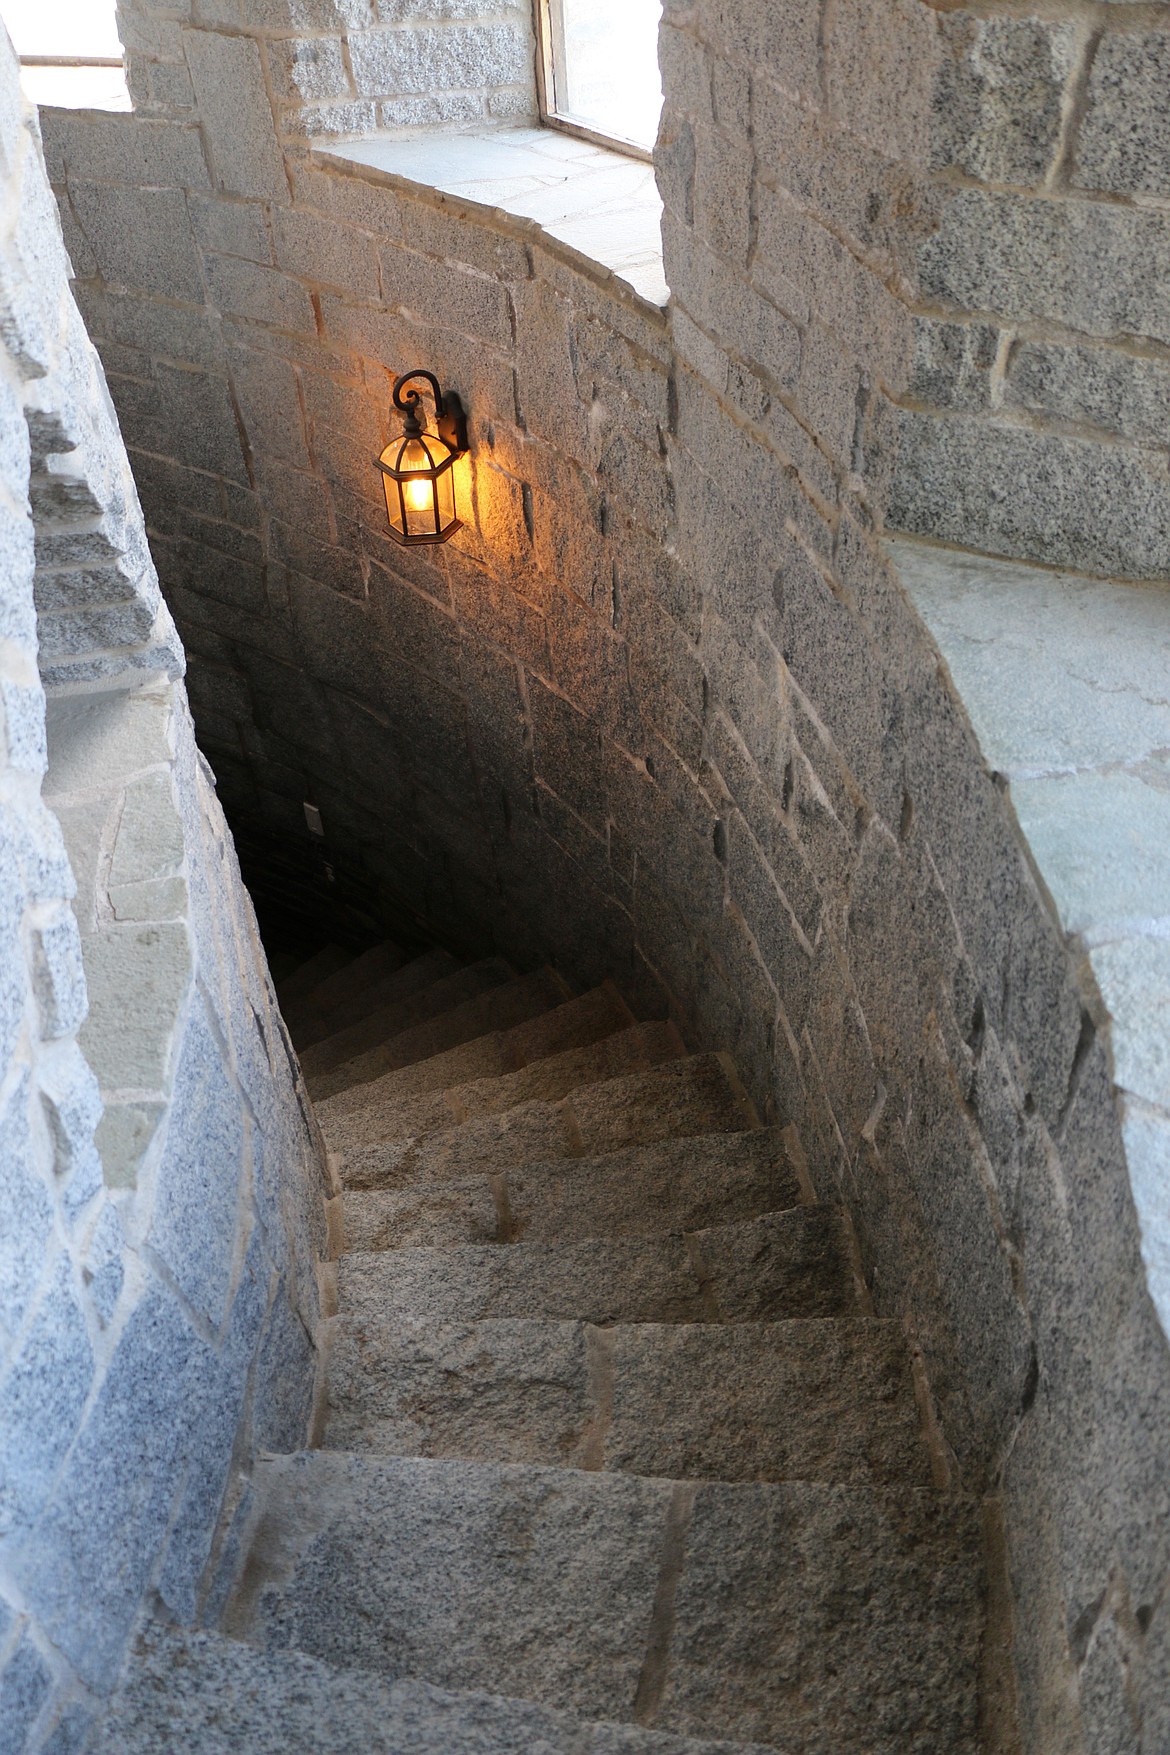 A curved stone stairway leading down to the tunnel entrance of the castle.